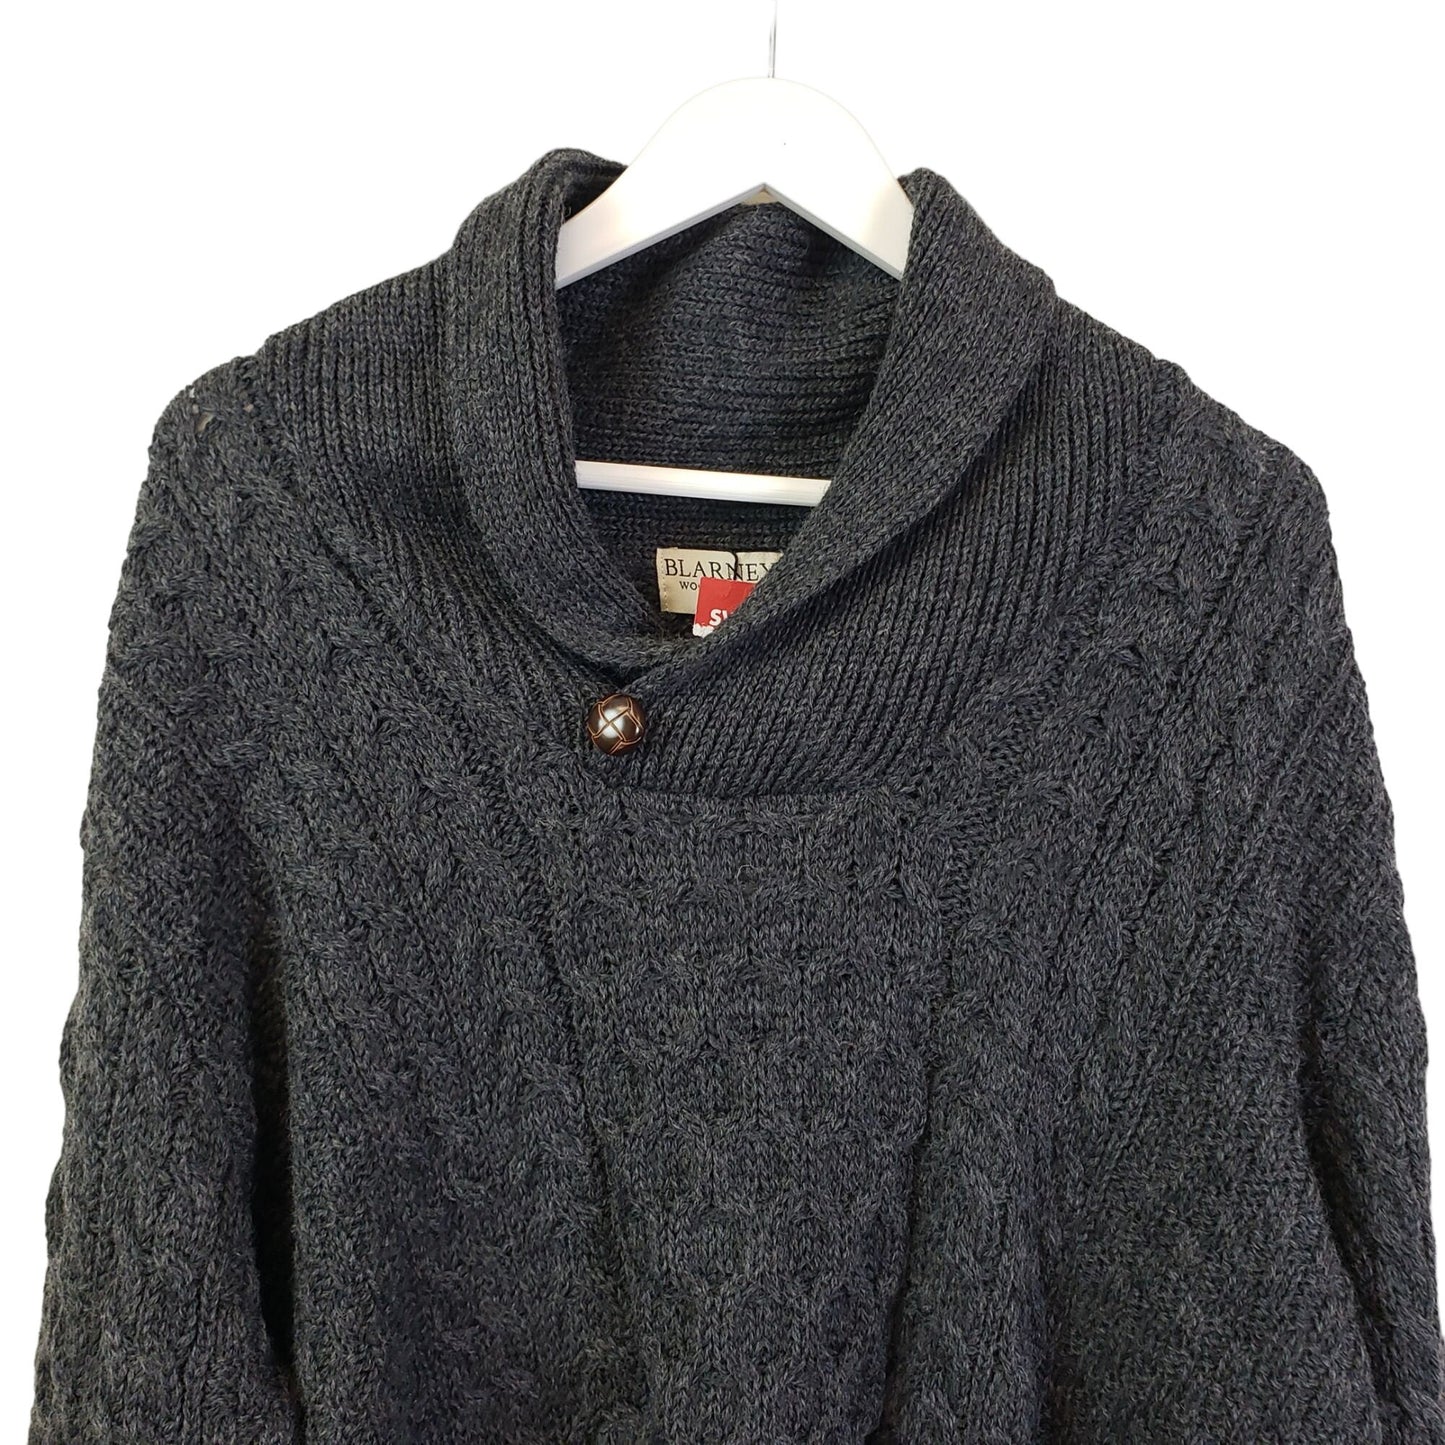 NWT Blarney Woollen Mills Wool Cable Knit Sweater Size S/M